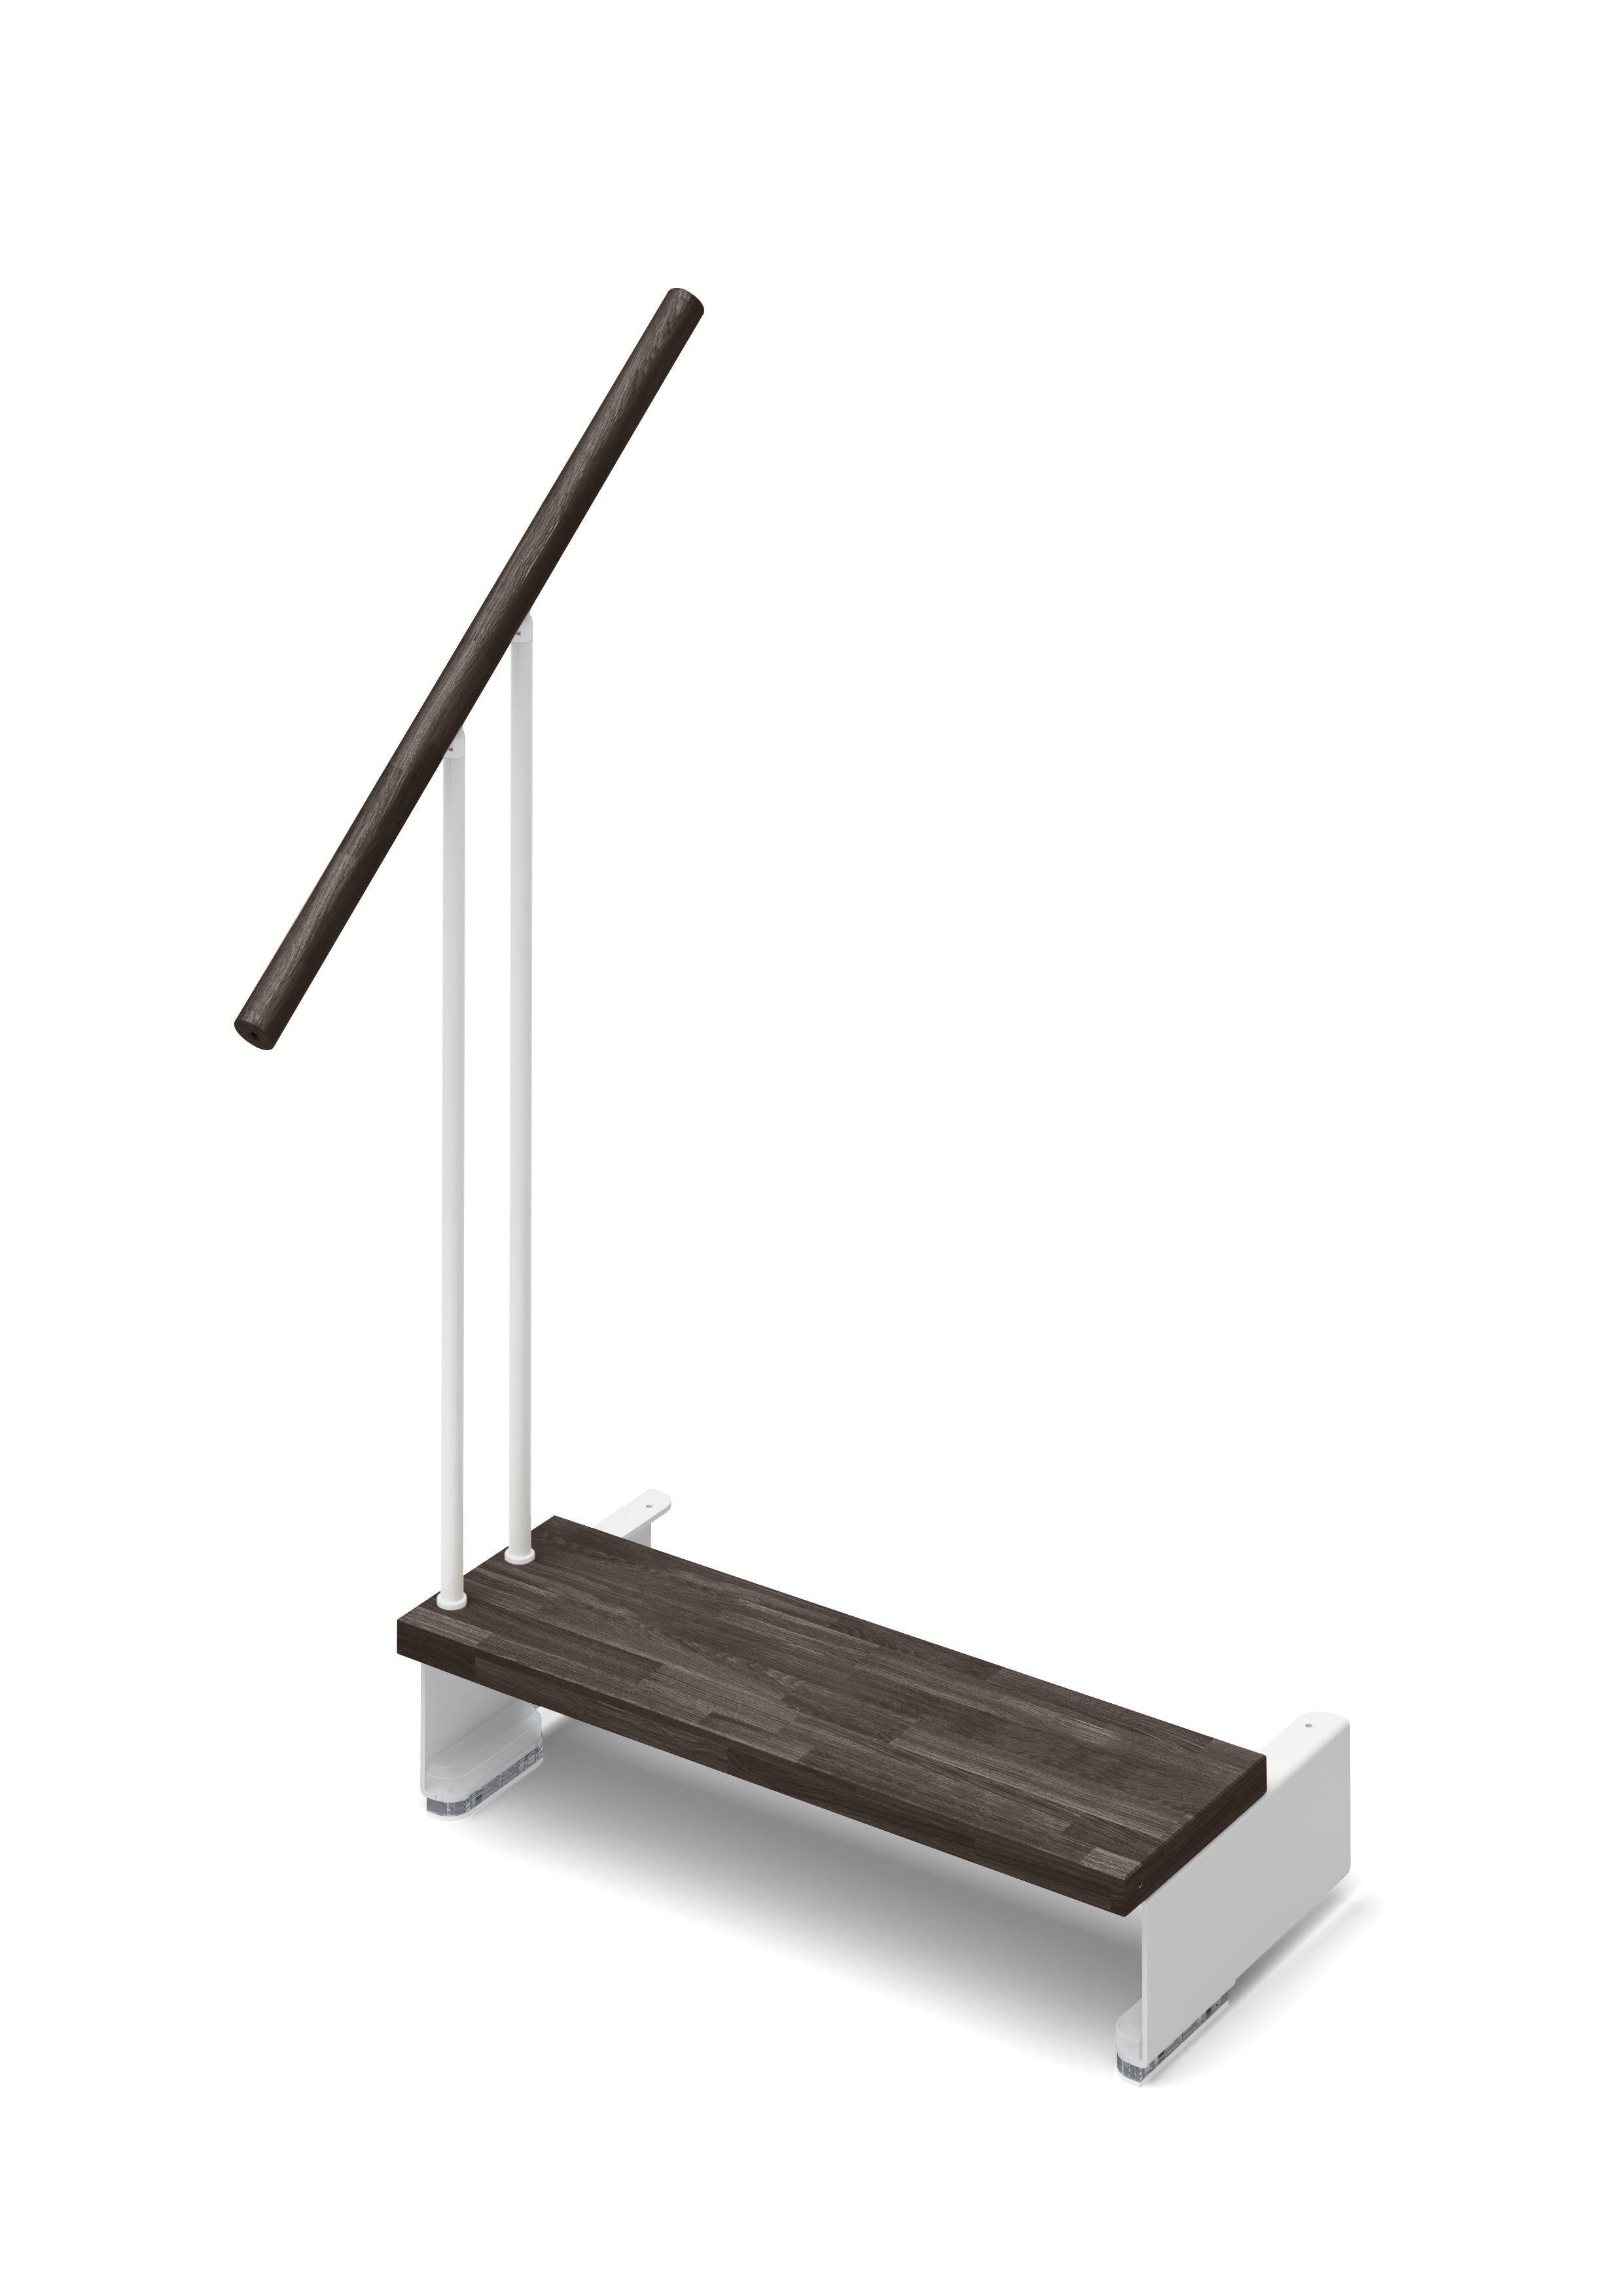 Additional step Adapta 74cm (with structure and railing) - Wengé 23